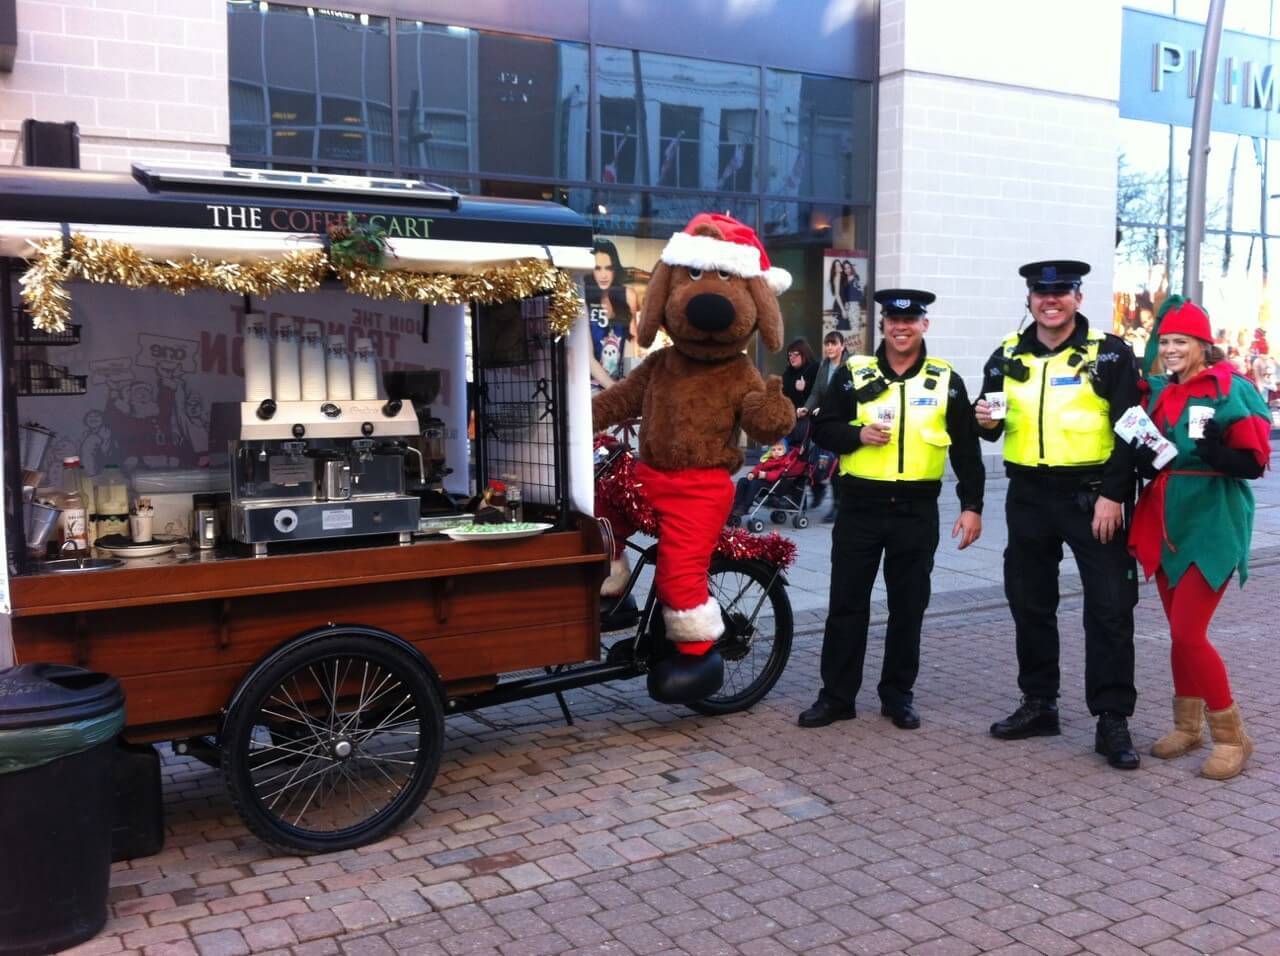 policemen getting a cup of coffee from the coffee cart